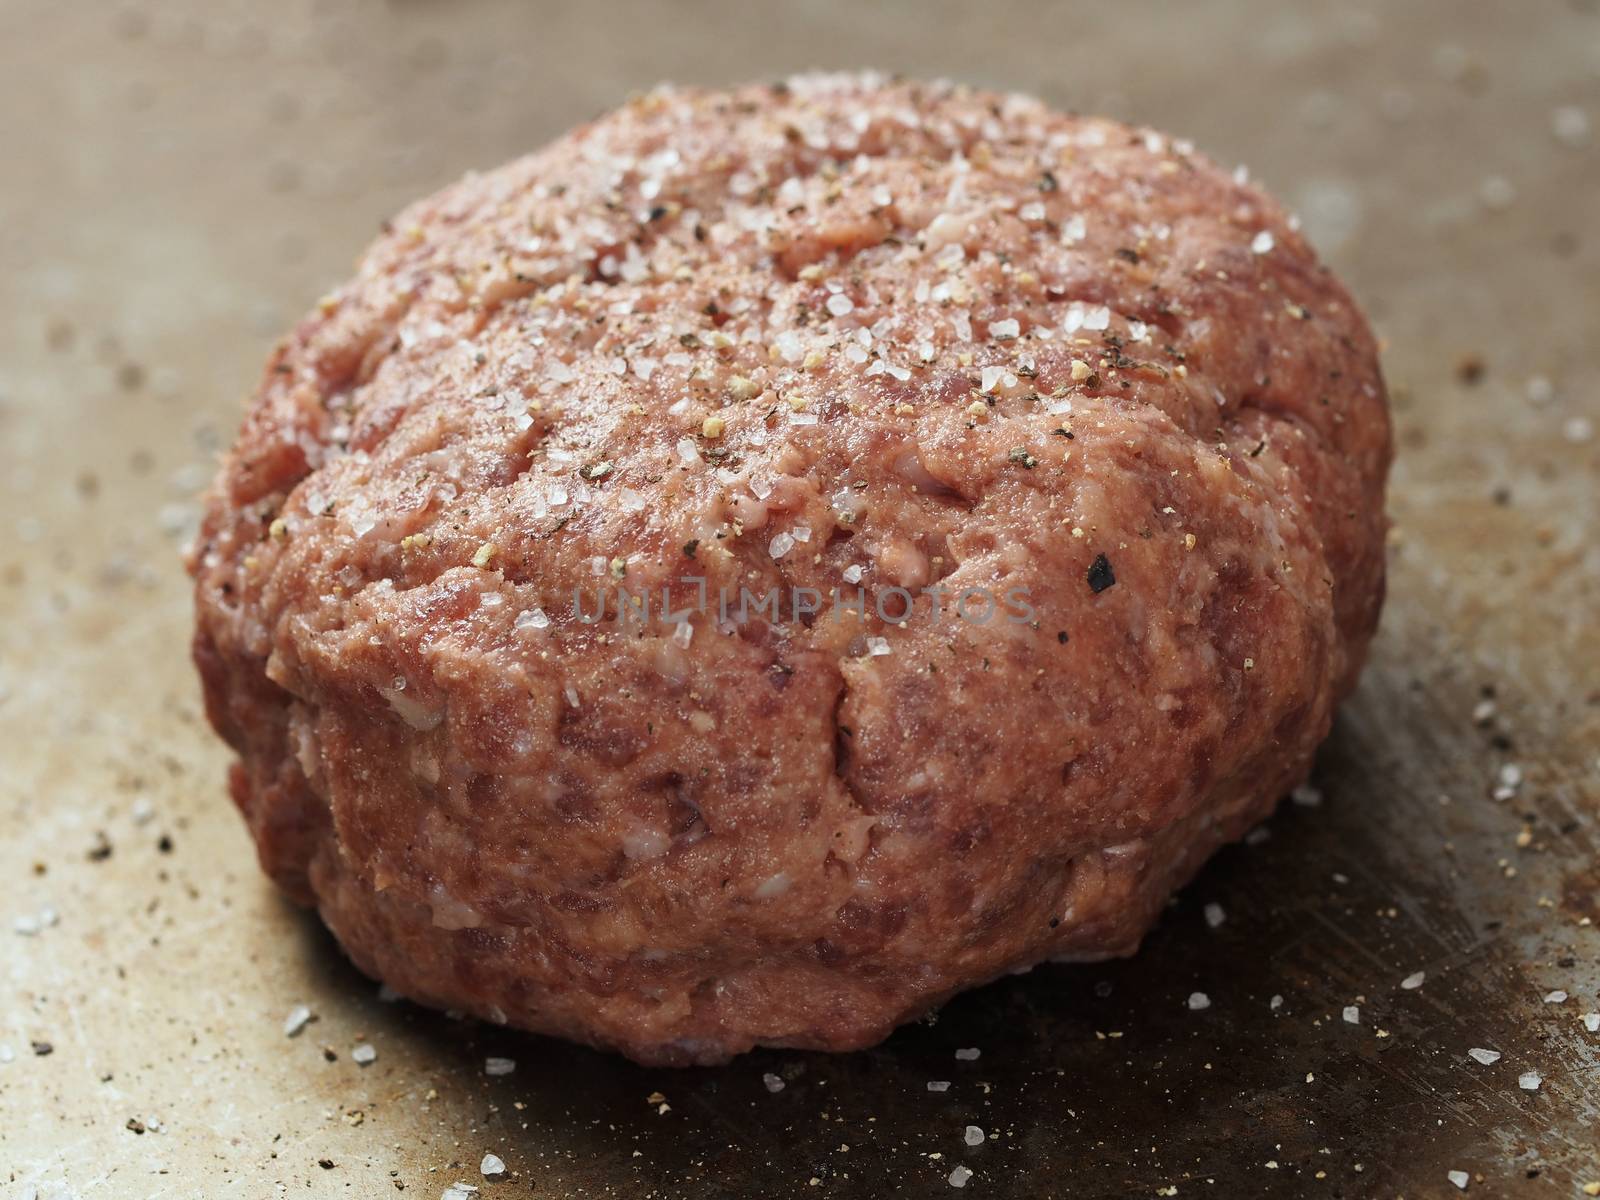 rustic uncooked seasoned hamburger patty by zkruger